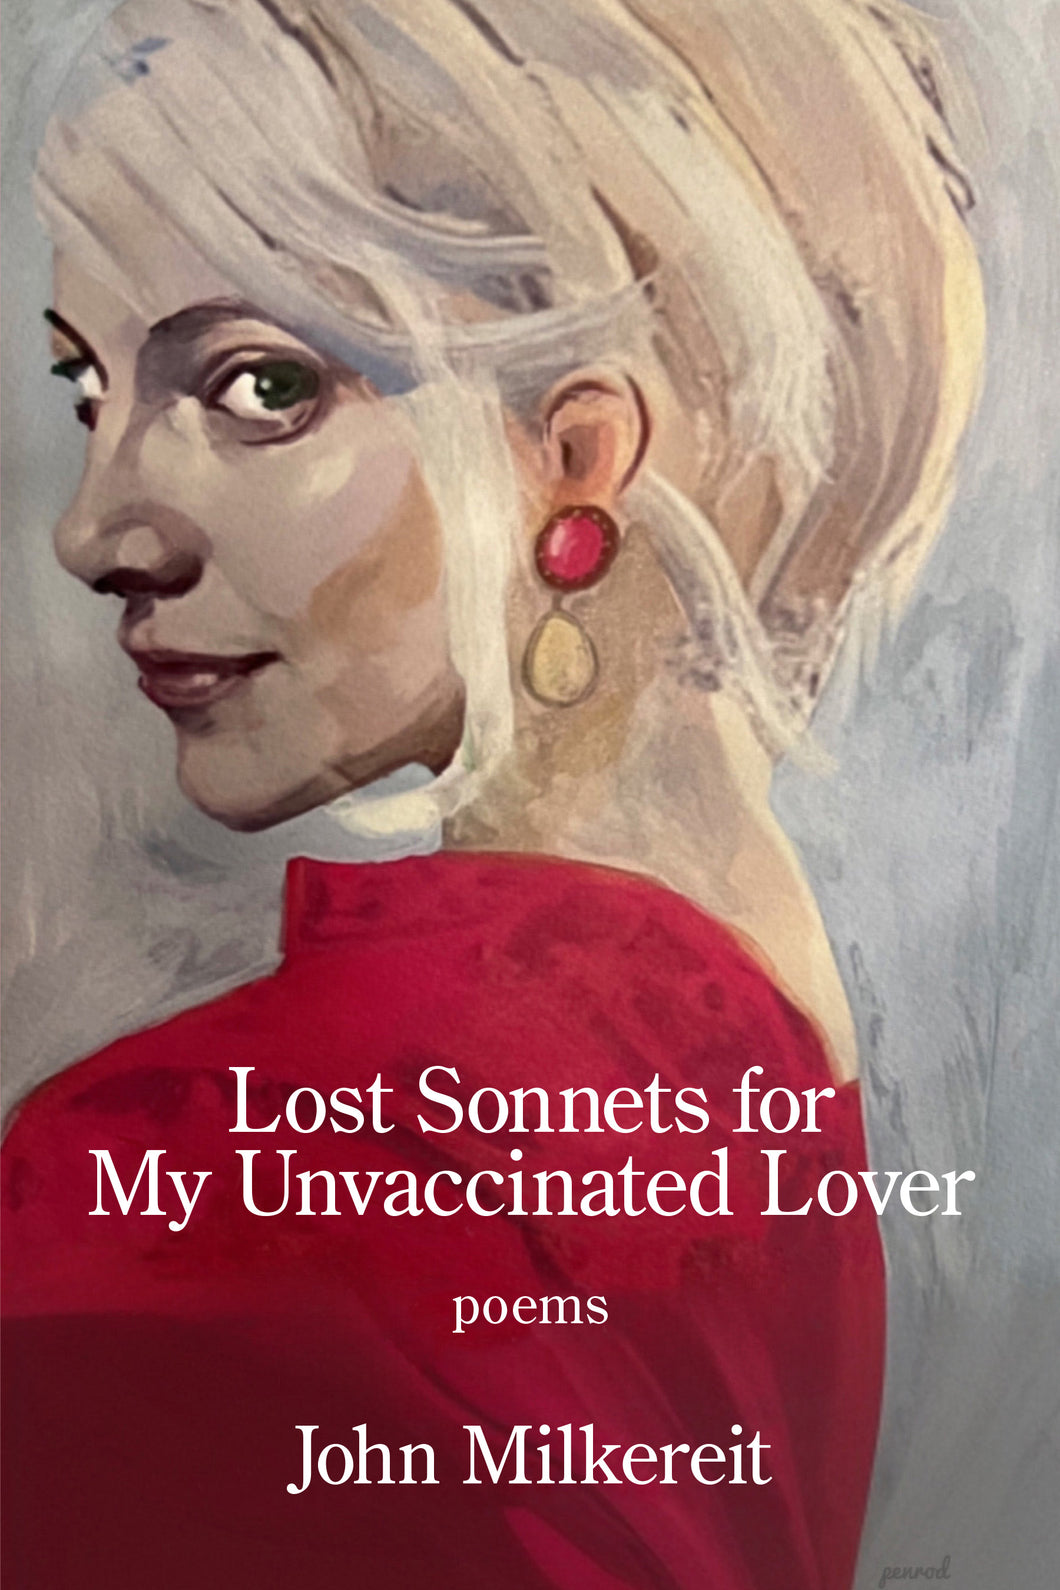 Lost Sonnets for My Unvaccinated Lover